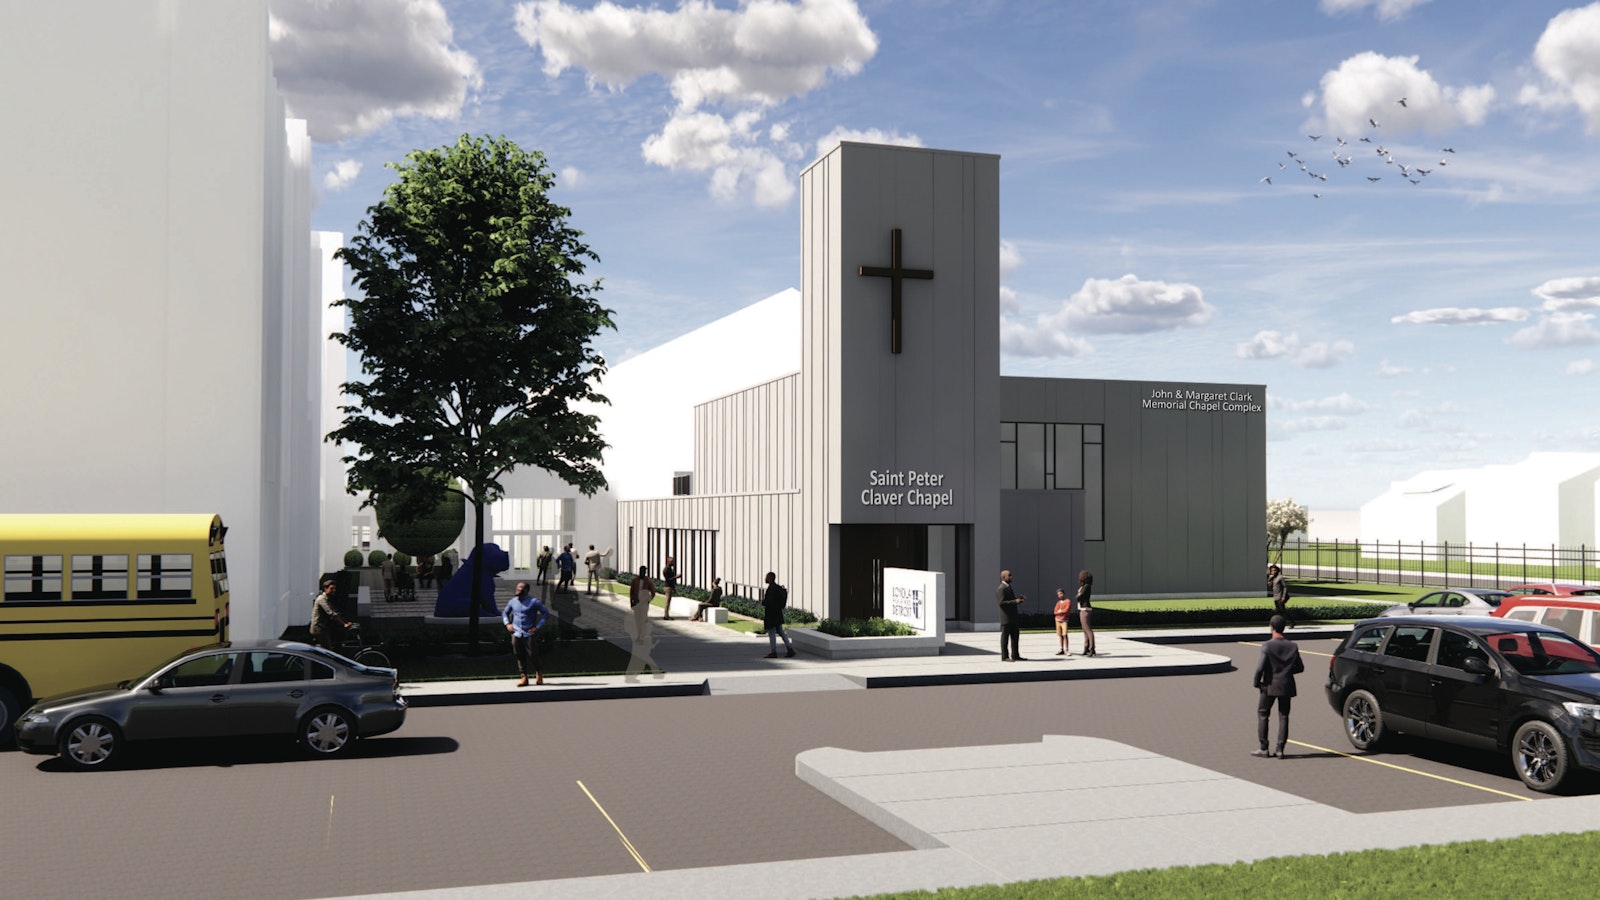 Artists renderings show what the St. Peter Claver Chapel at Loyola High School will look like once finished. Constructed is planned to be completed by early 2025. (Courtesy of Loyola High School)